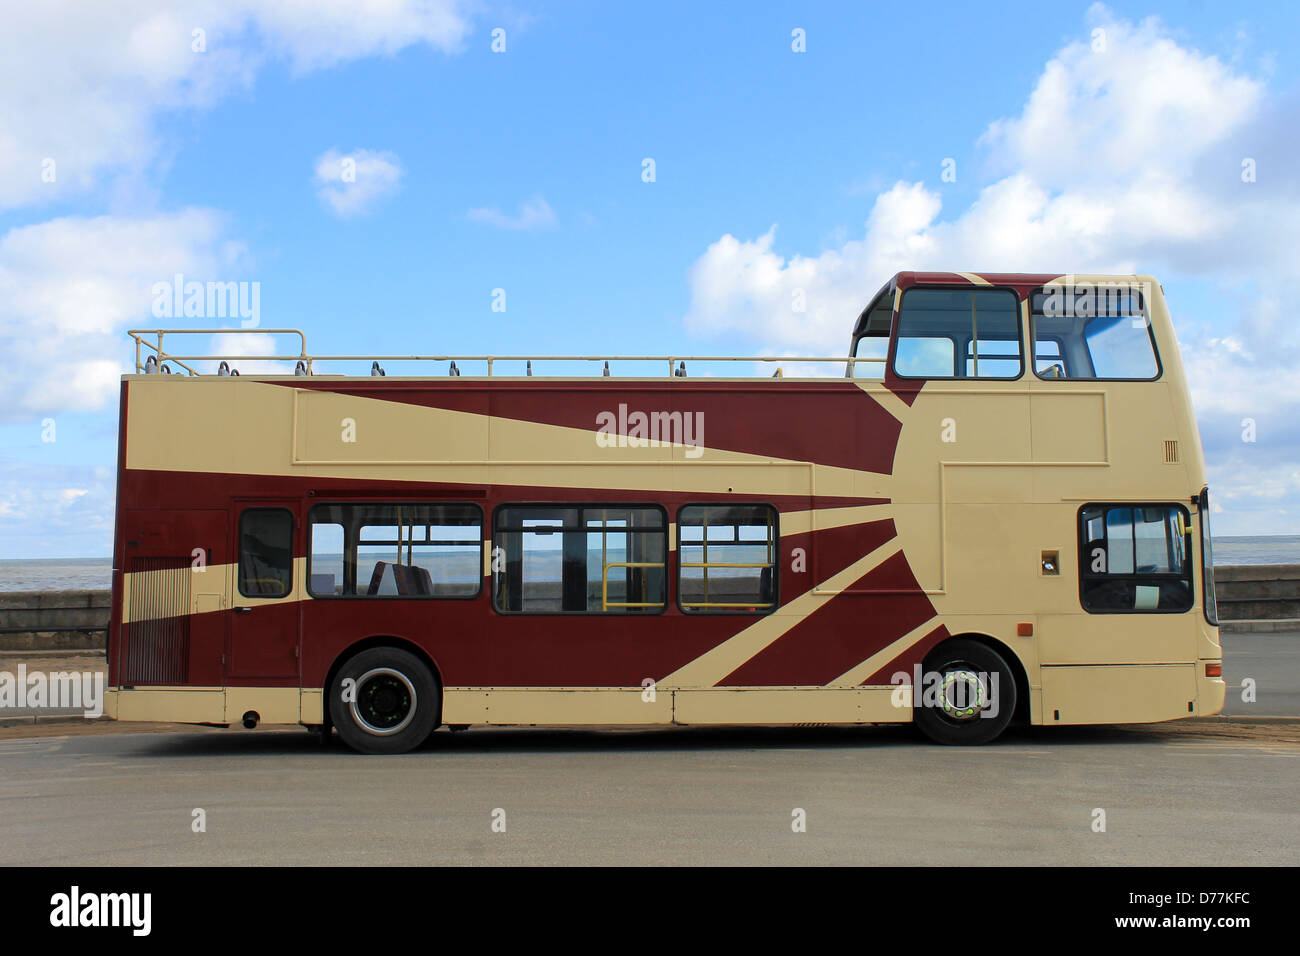 Open top tour bus parked with sea and cloudscape background. Stock Photo